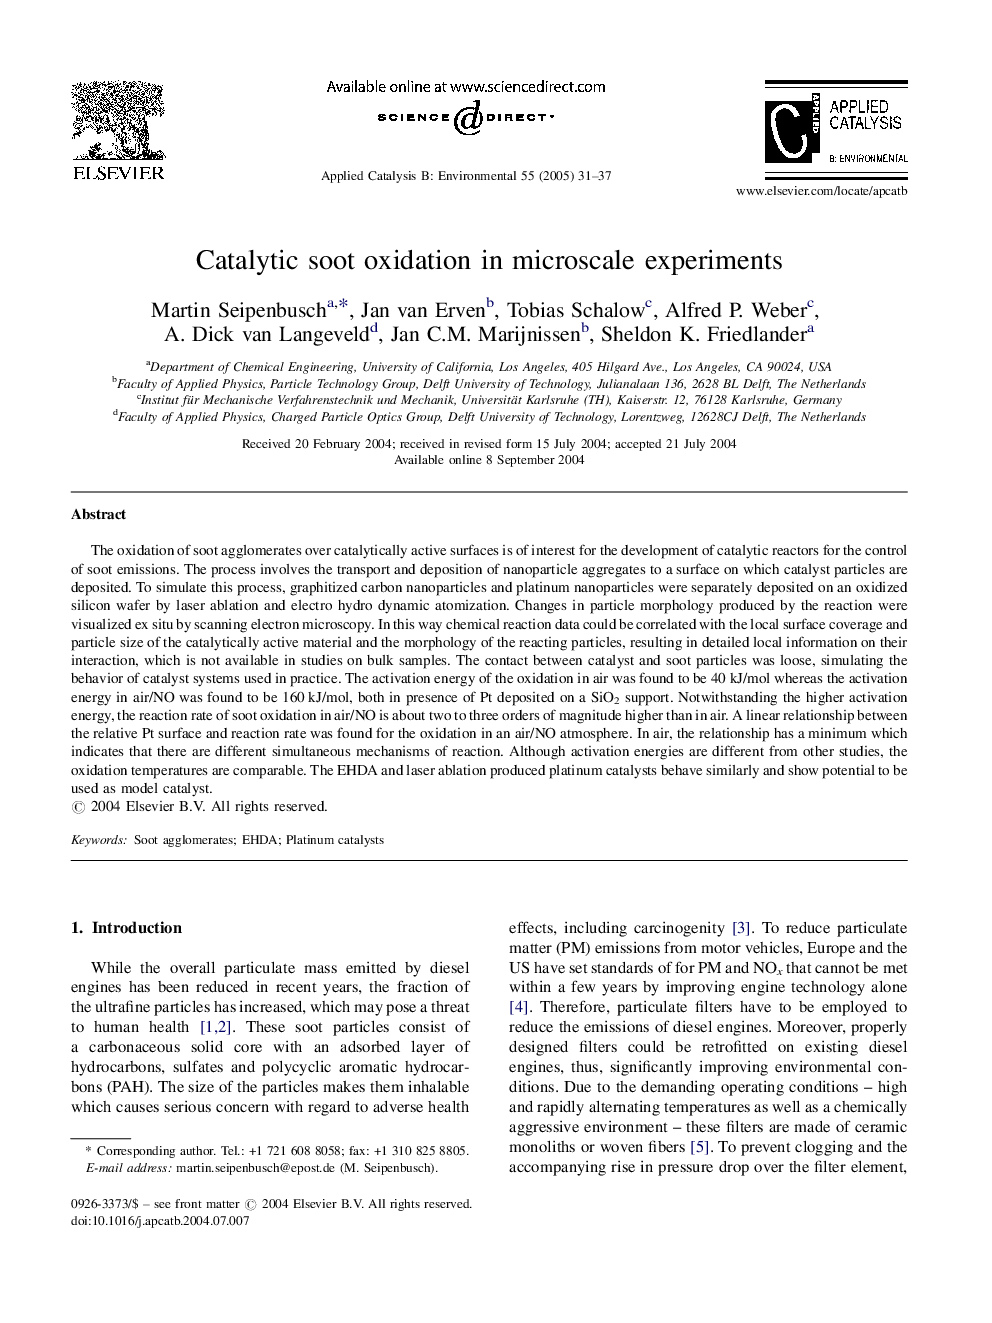 Catalytic soot oxidation in microscale experiments